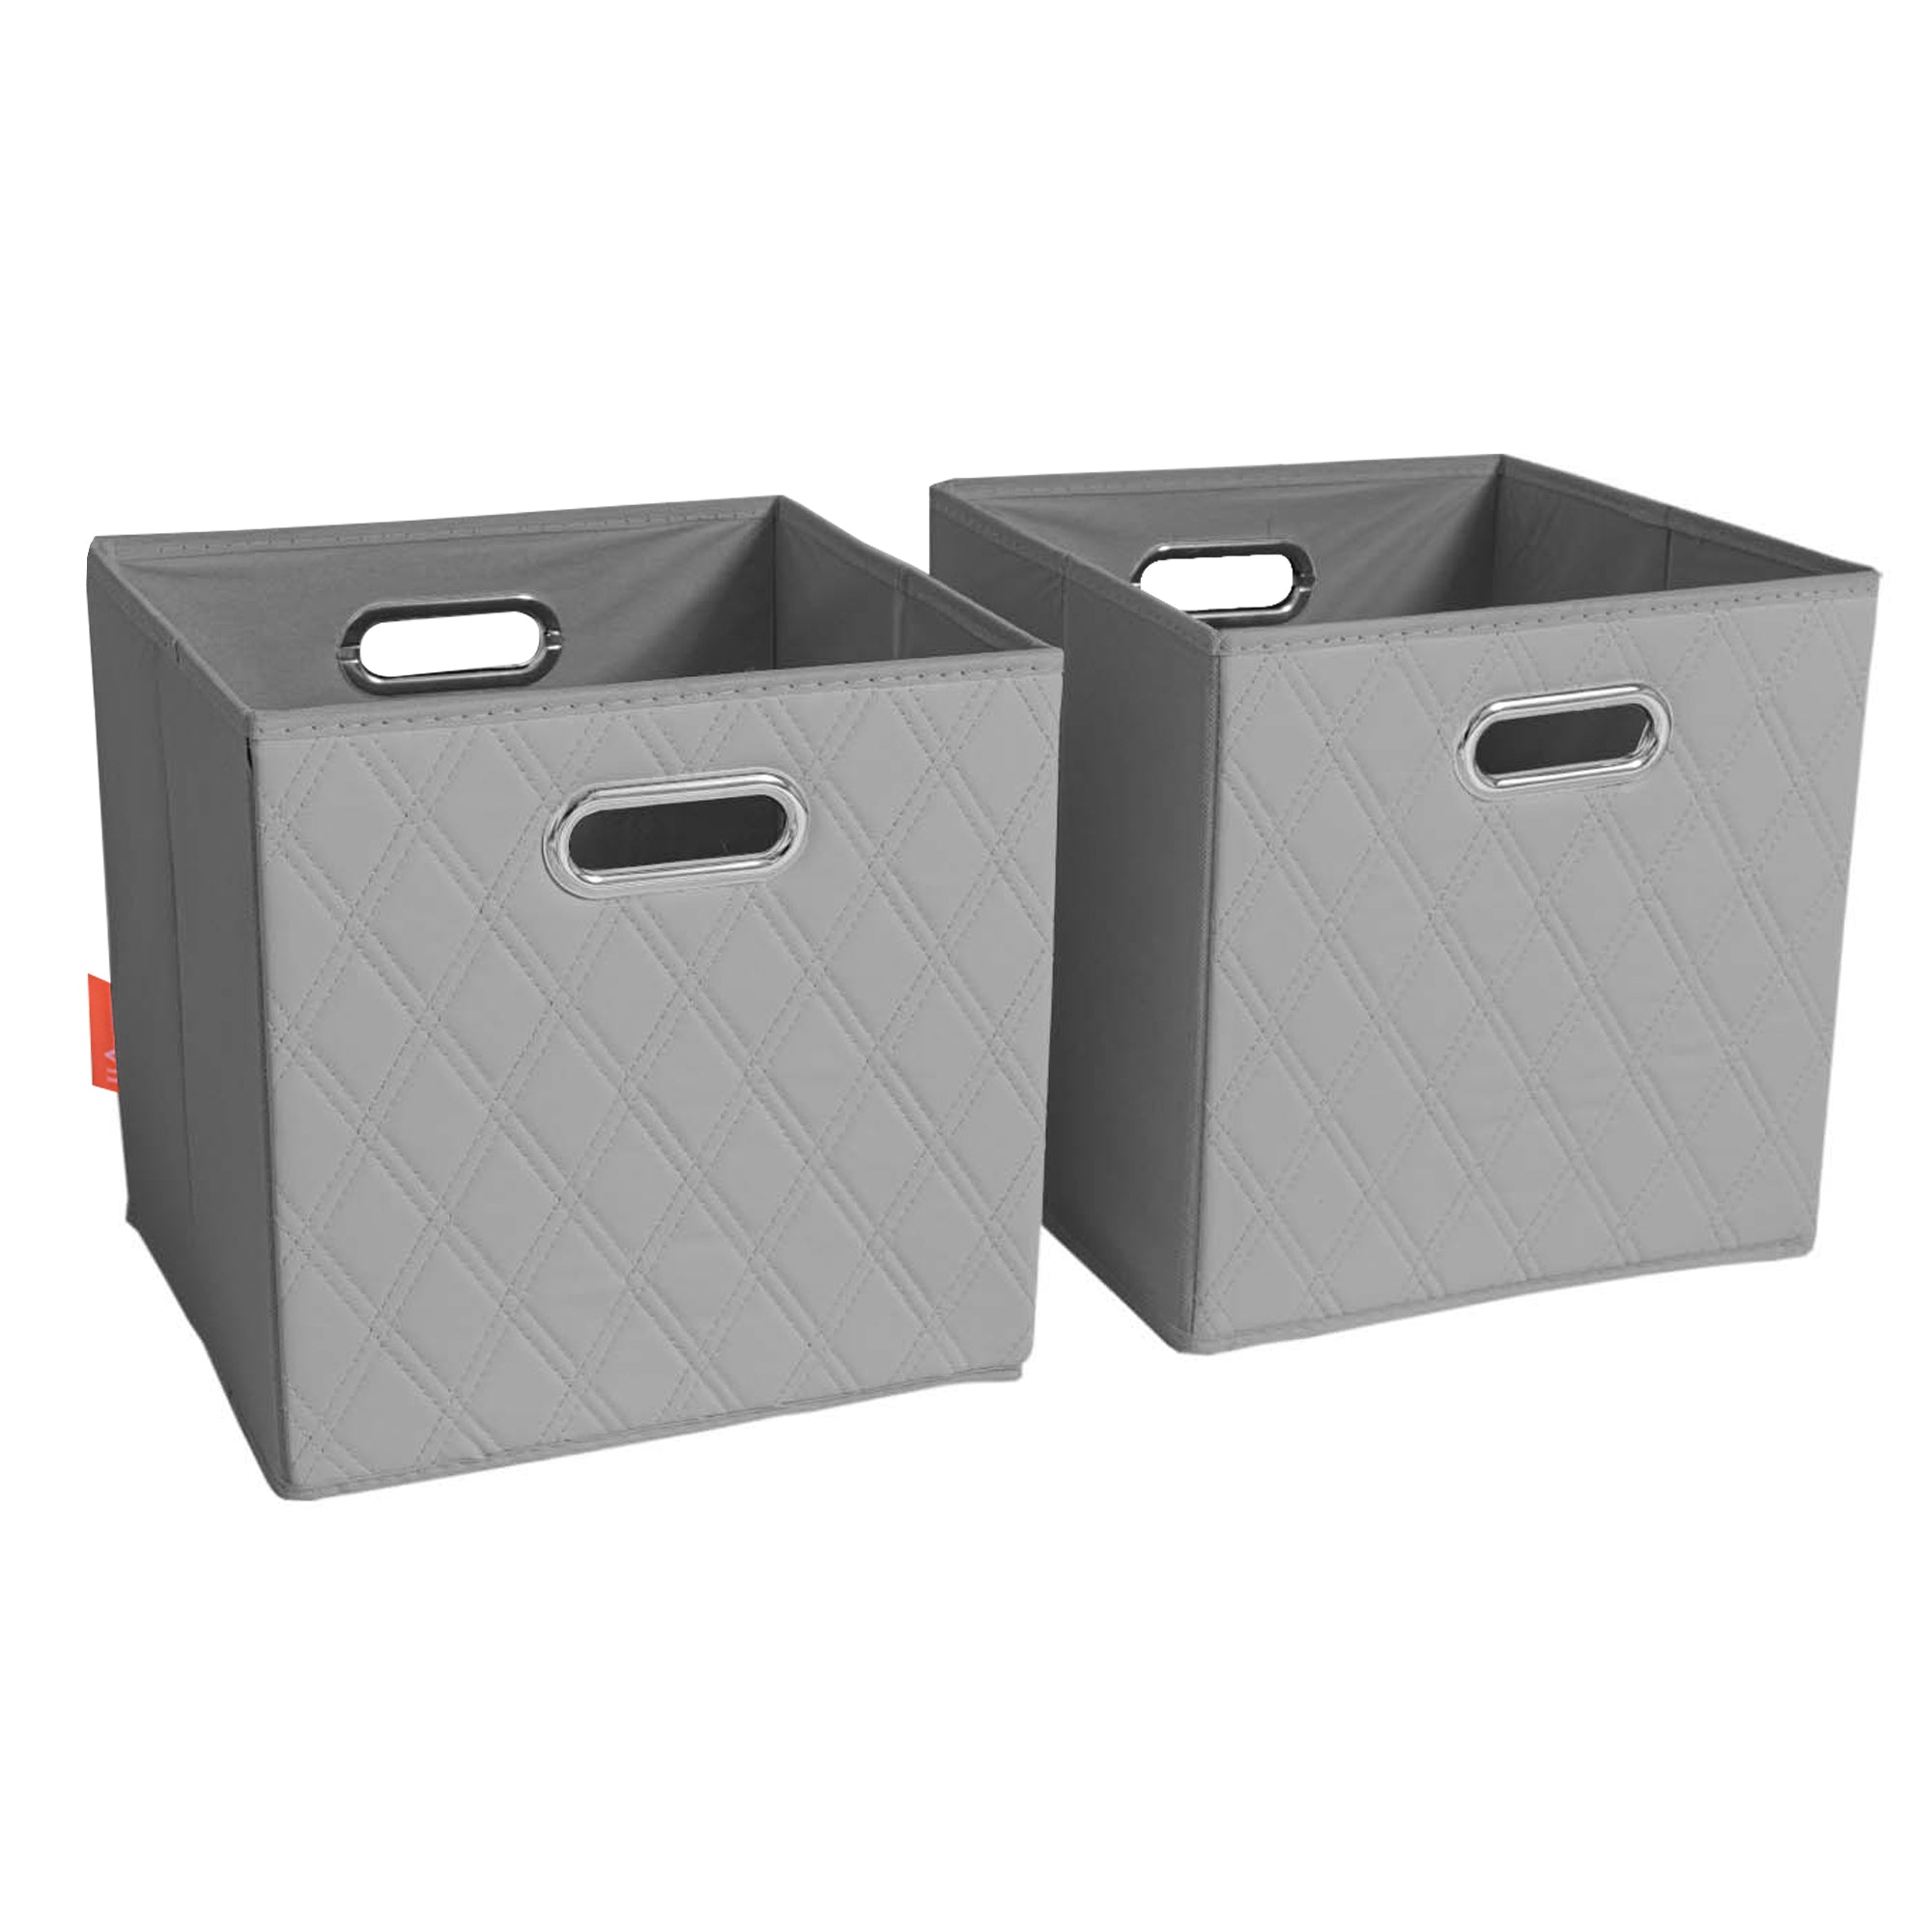 JIAessentials 11 inch Foldable Diamond Patterned Faux Leather Storage Cube Bins Set of Two with Dual Handles - 11" Gray